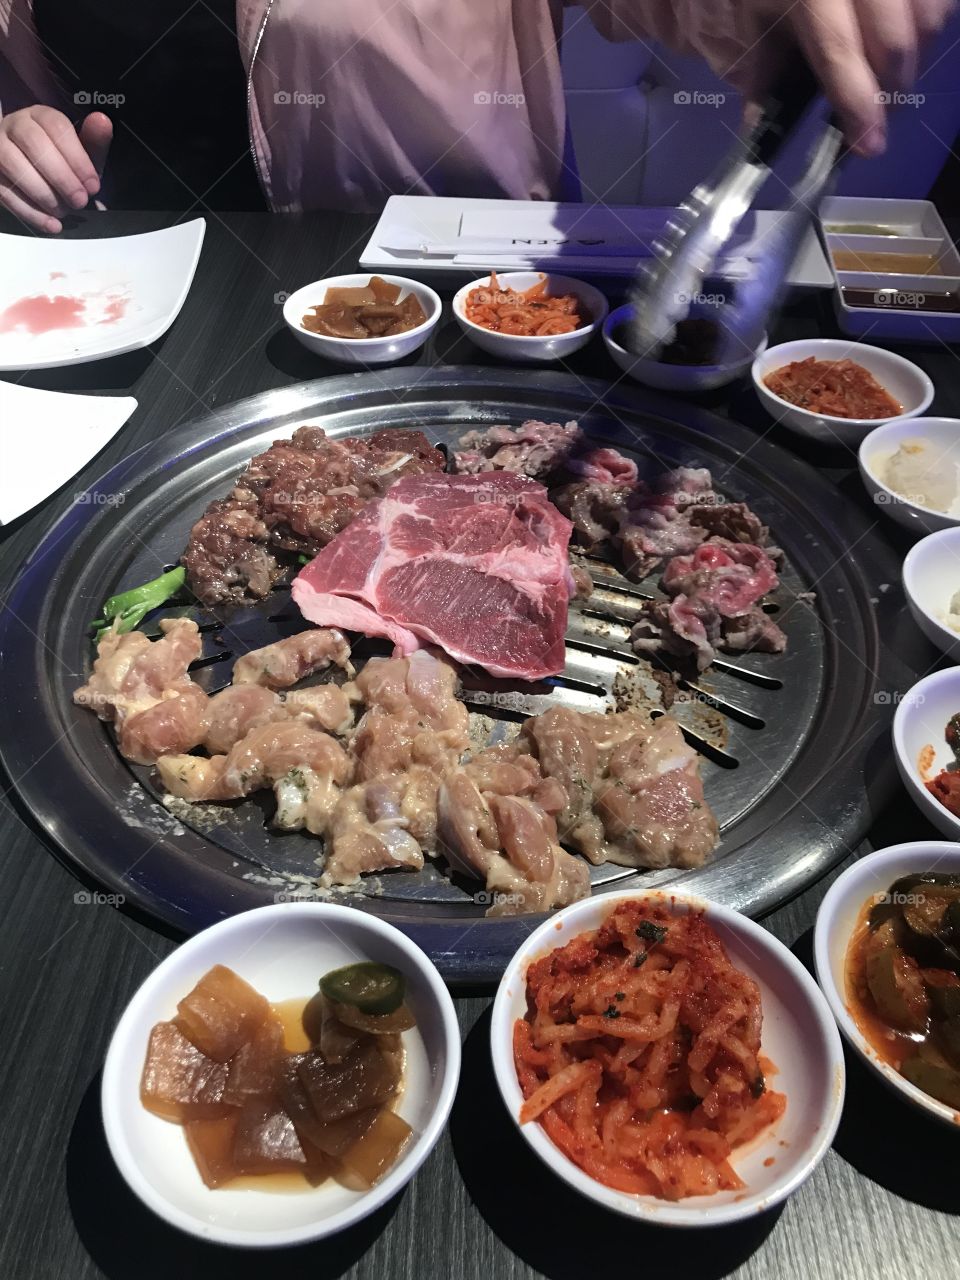 It was my first time experiencing Korean bbq loved it didn’t know I had to cook it 🤔